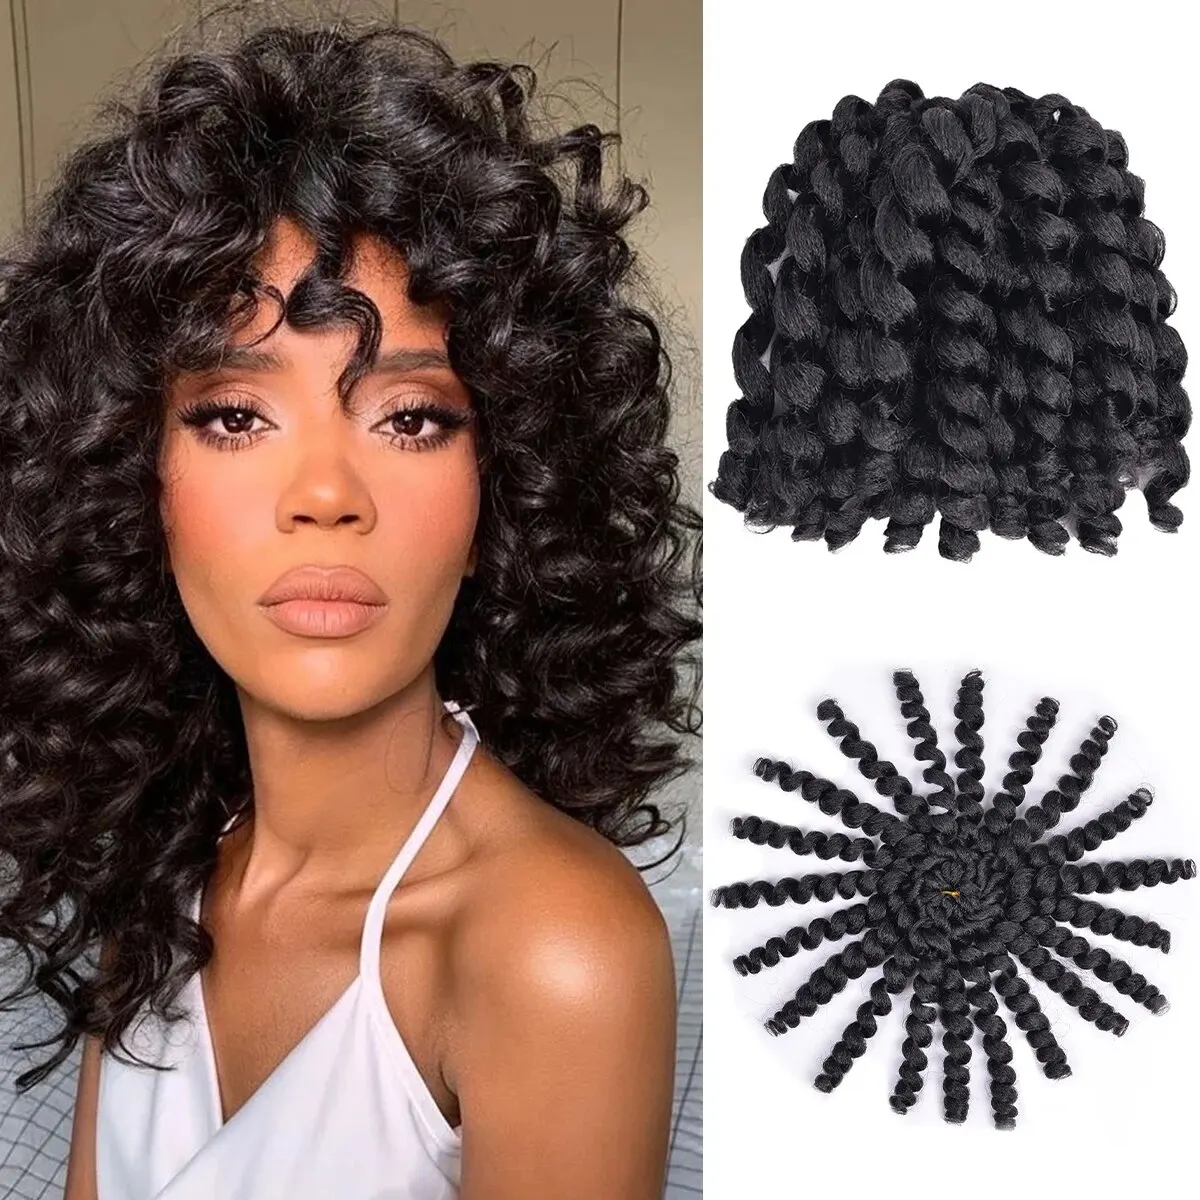 

8Inch Ombre Braiding Hair Jumpy Wand Curl Crochet Braids Synthetic Hair Extension Jamaican Braiding Pre-Twisted For Black Women